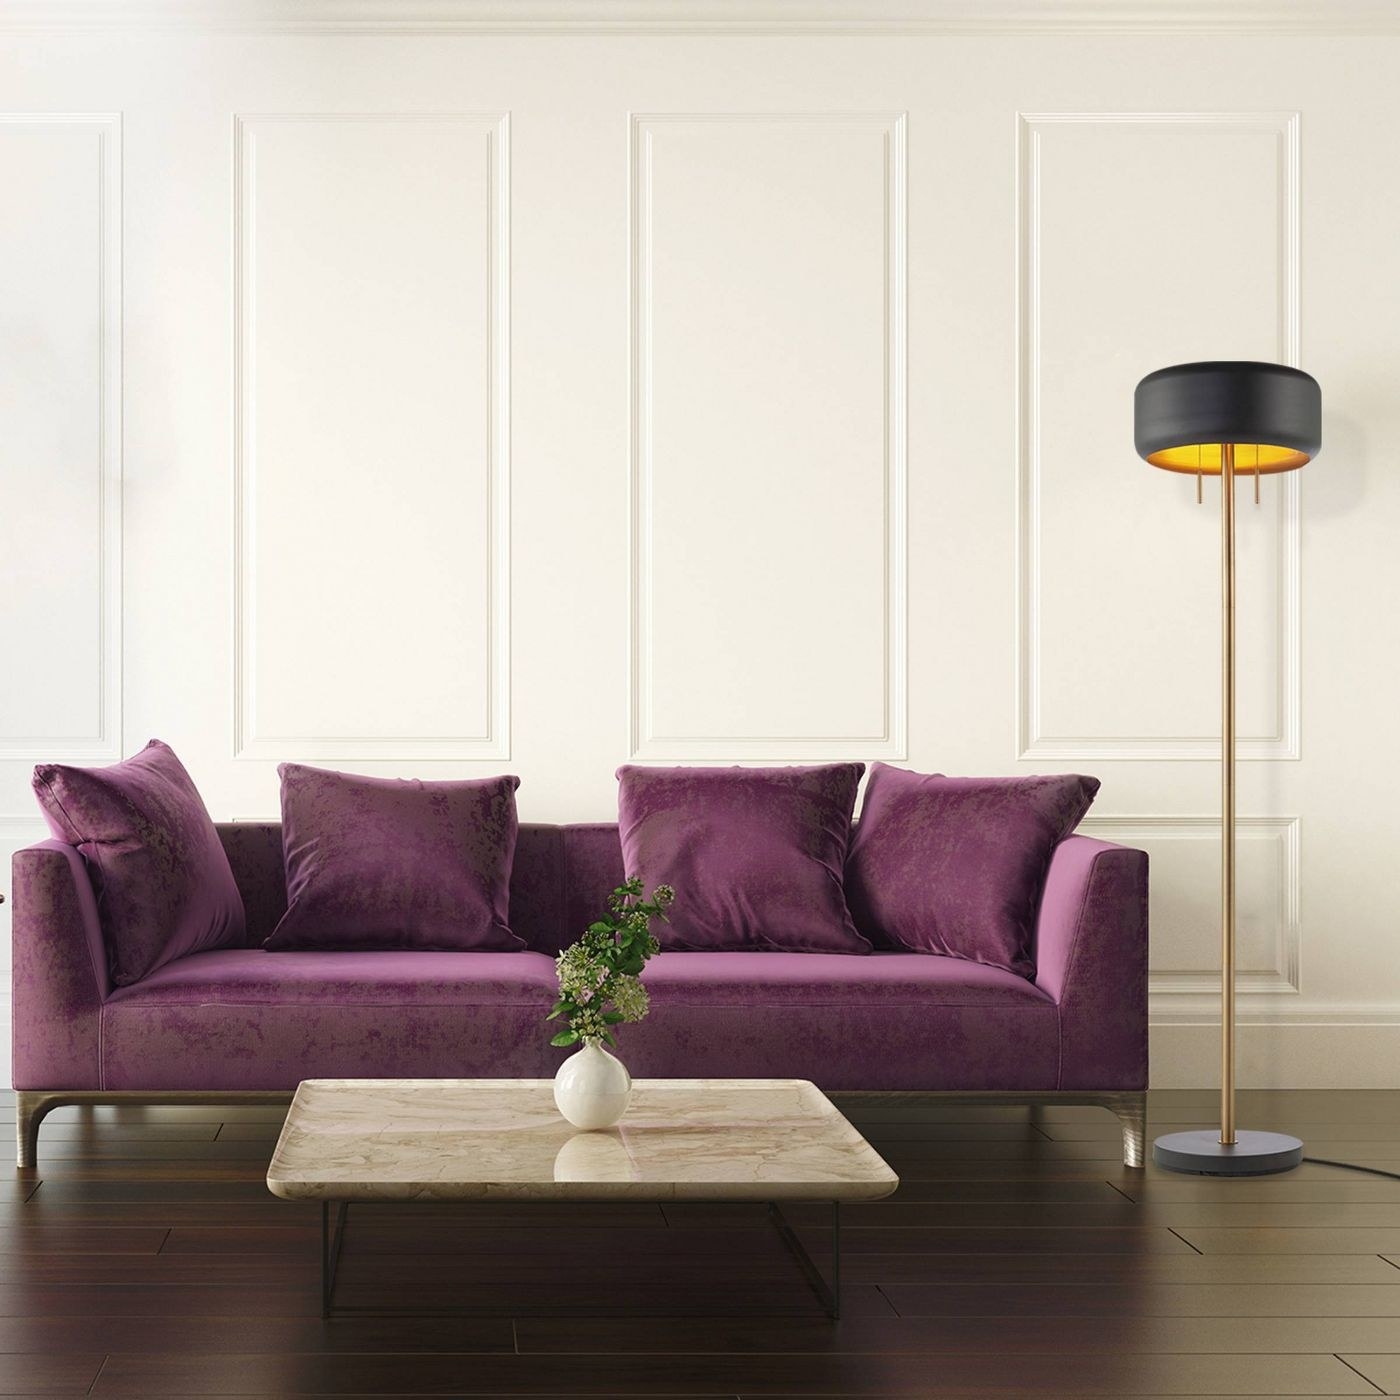 the floor lamp next to a purple velvet couch